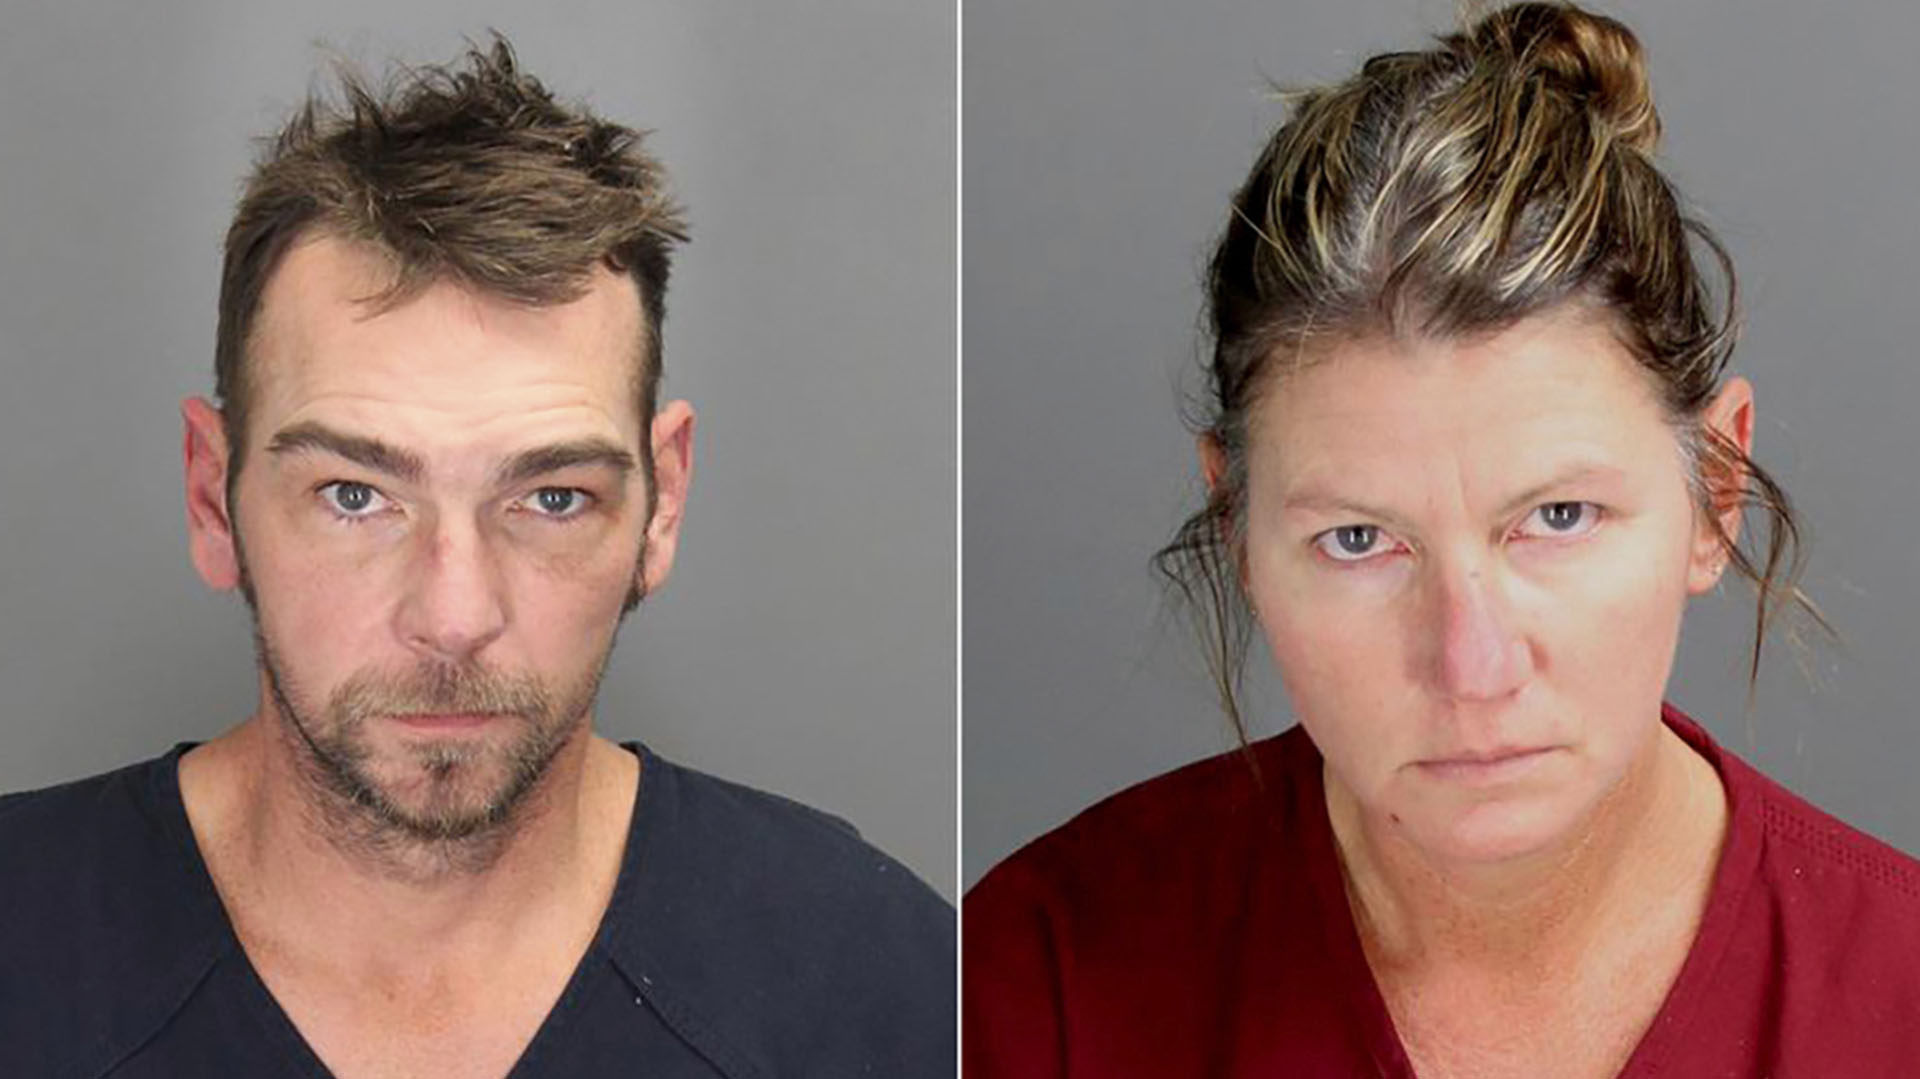 Photographs provided by the Oakland County Sheriff's Office: From left, James Crumbley and Jennifer Crumbley, Ethan Crumbley (Oakland County Sheriff's Office via AP)